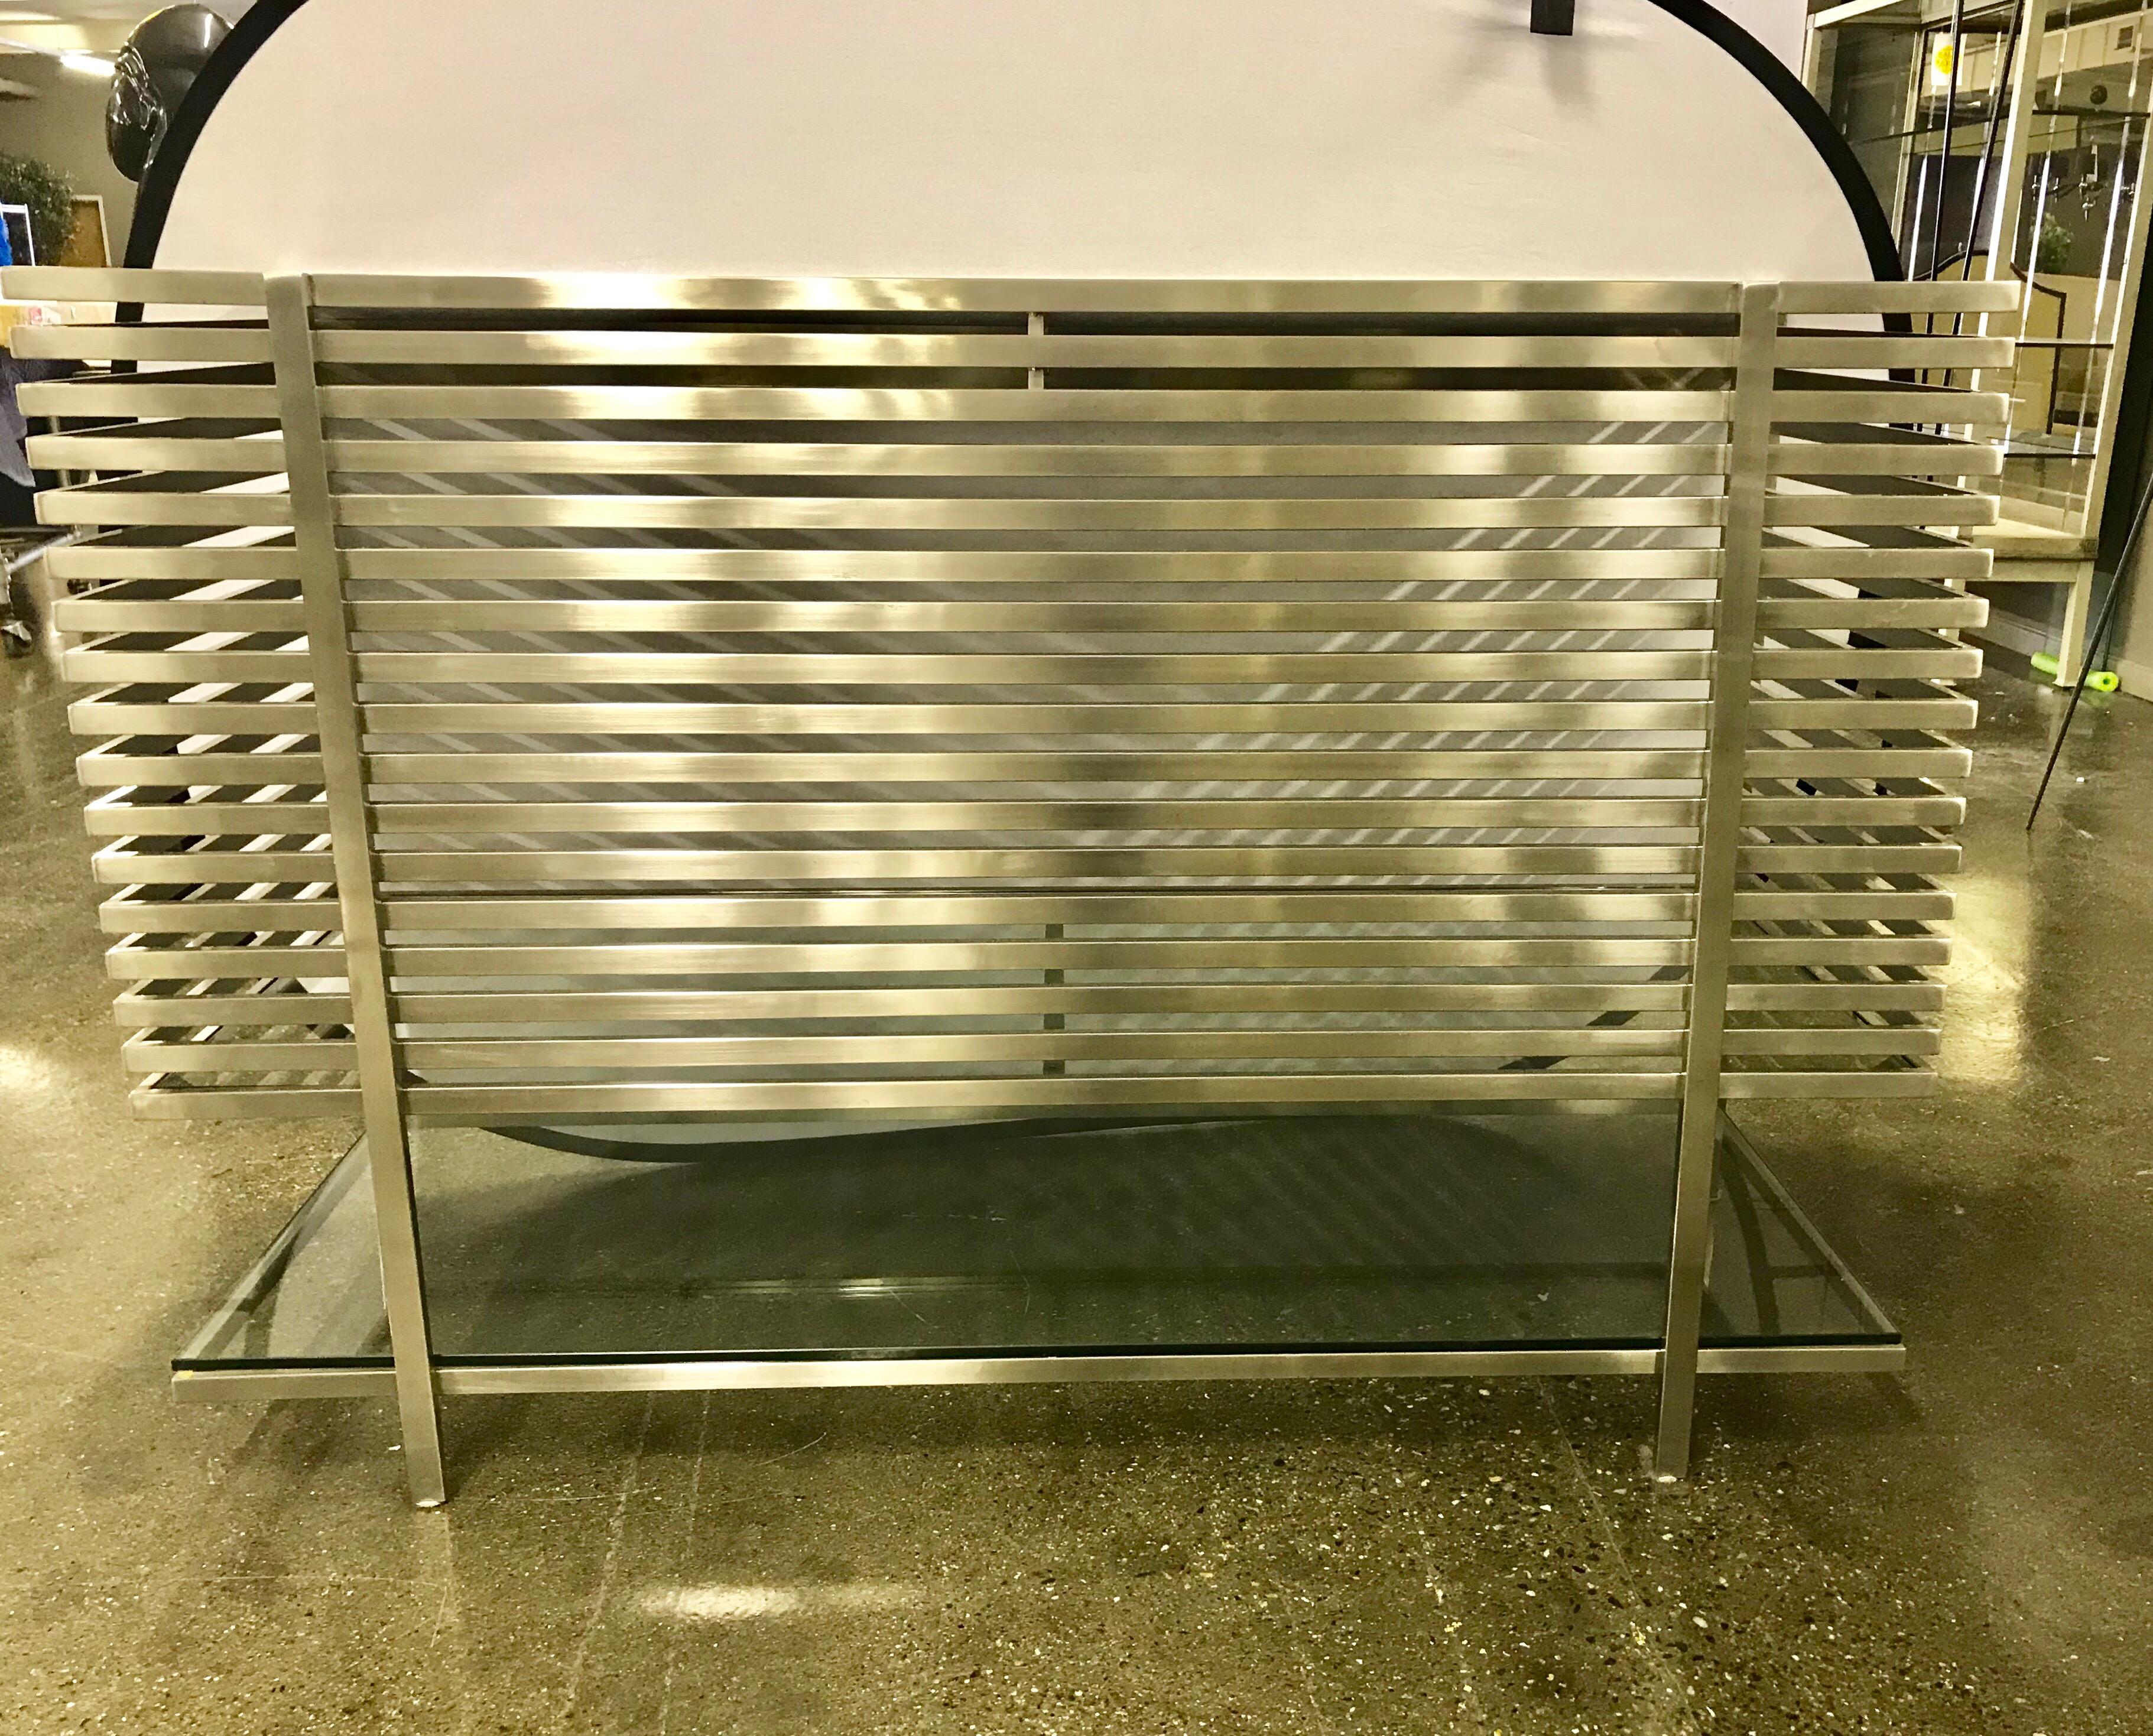 Architecturally inspired laser cut steel and chrome bar has a black glass top and clear glass shelving on the bottom. The perfect aesthetic for your contemporary or midcentury home. Retailed new for over $10,000.00. Mint condition.